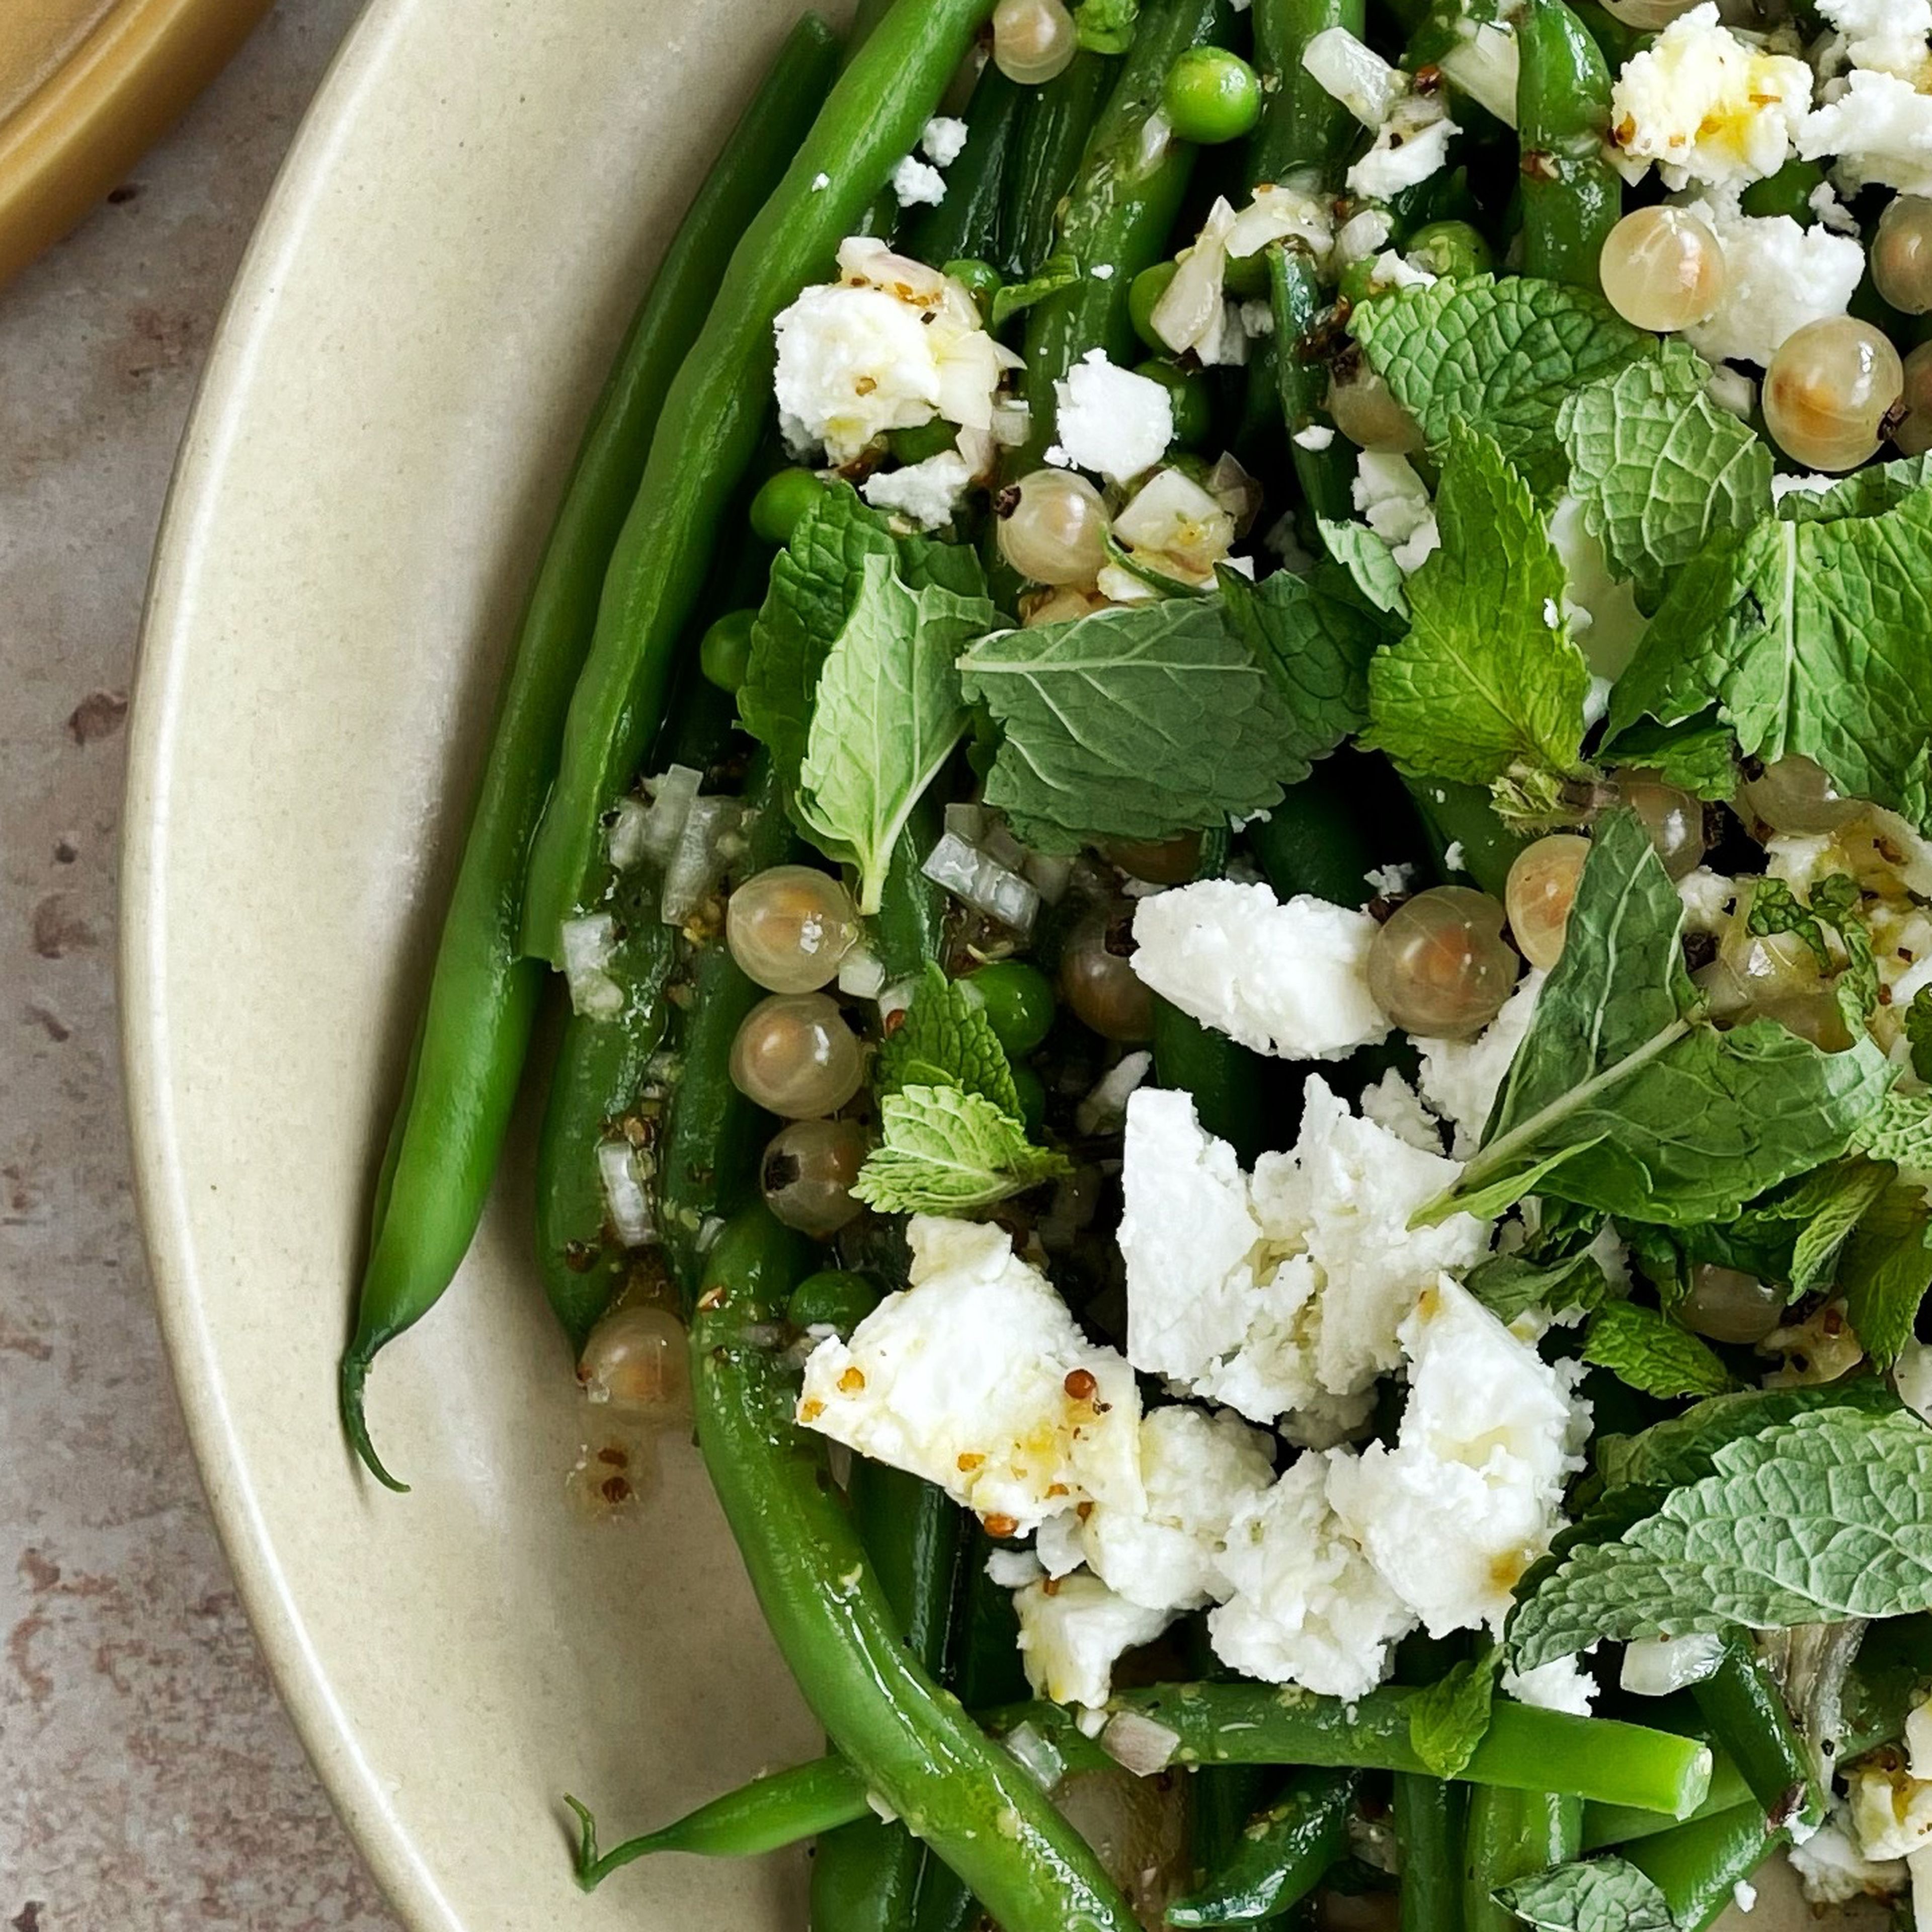 Arrange the beans and peas on a large plate. Top with feta cheese and currants and garnish with mint.